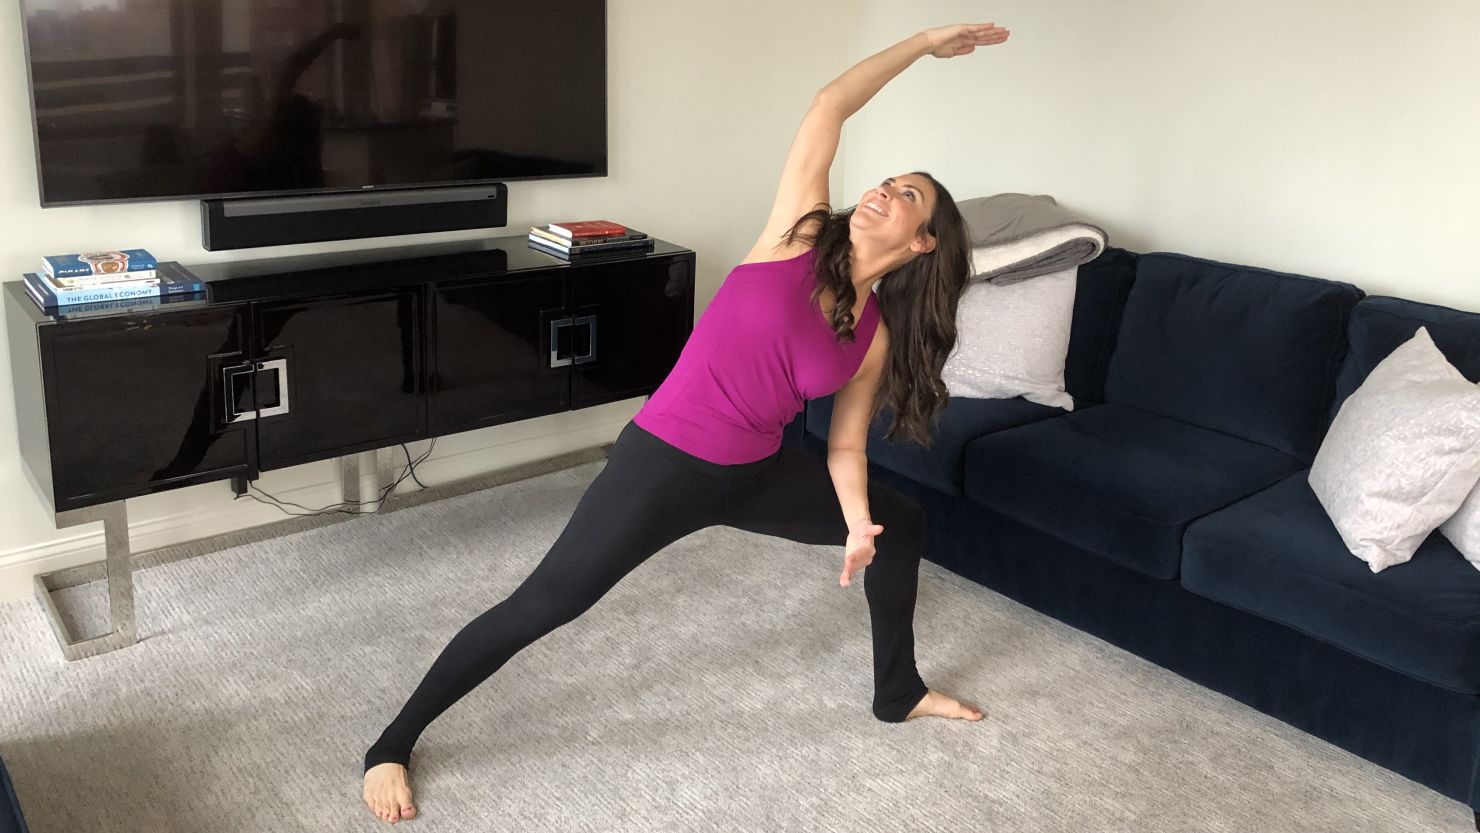 Stephanie Mansour, host of "Step It Up With Steph" on PBS, demonstrates the side-angle pose, which can help loosen up muscles in the upper back, neck and shoulders.